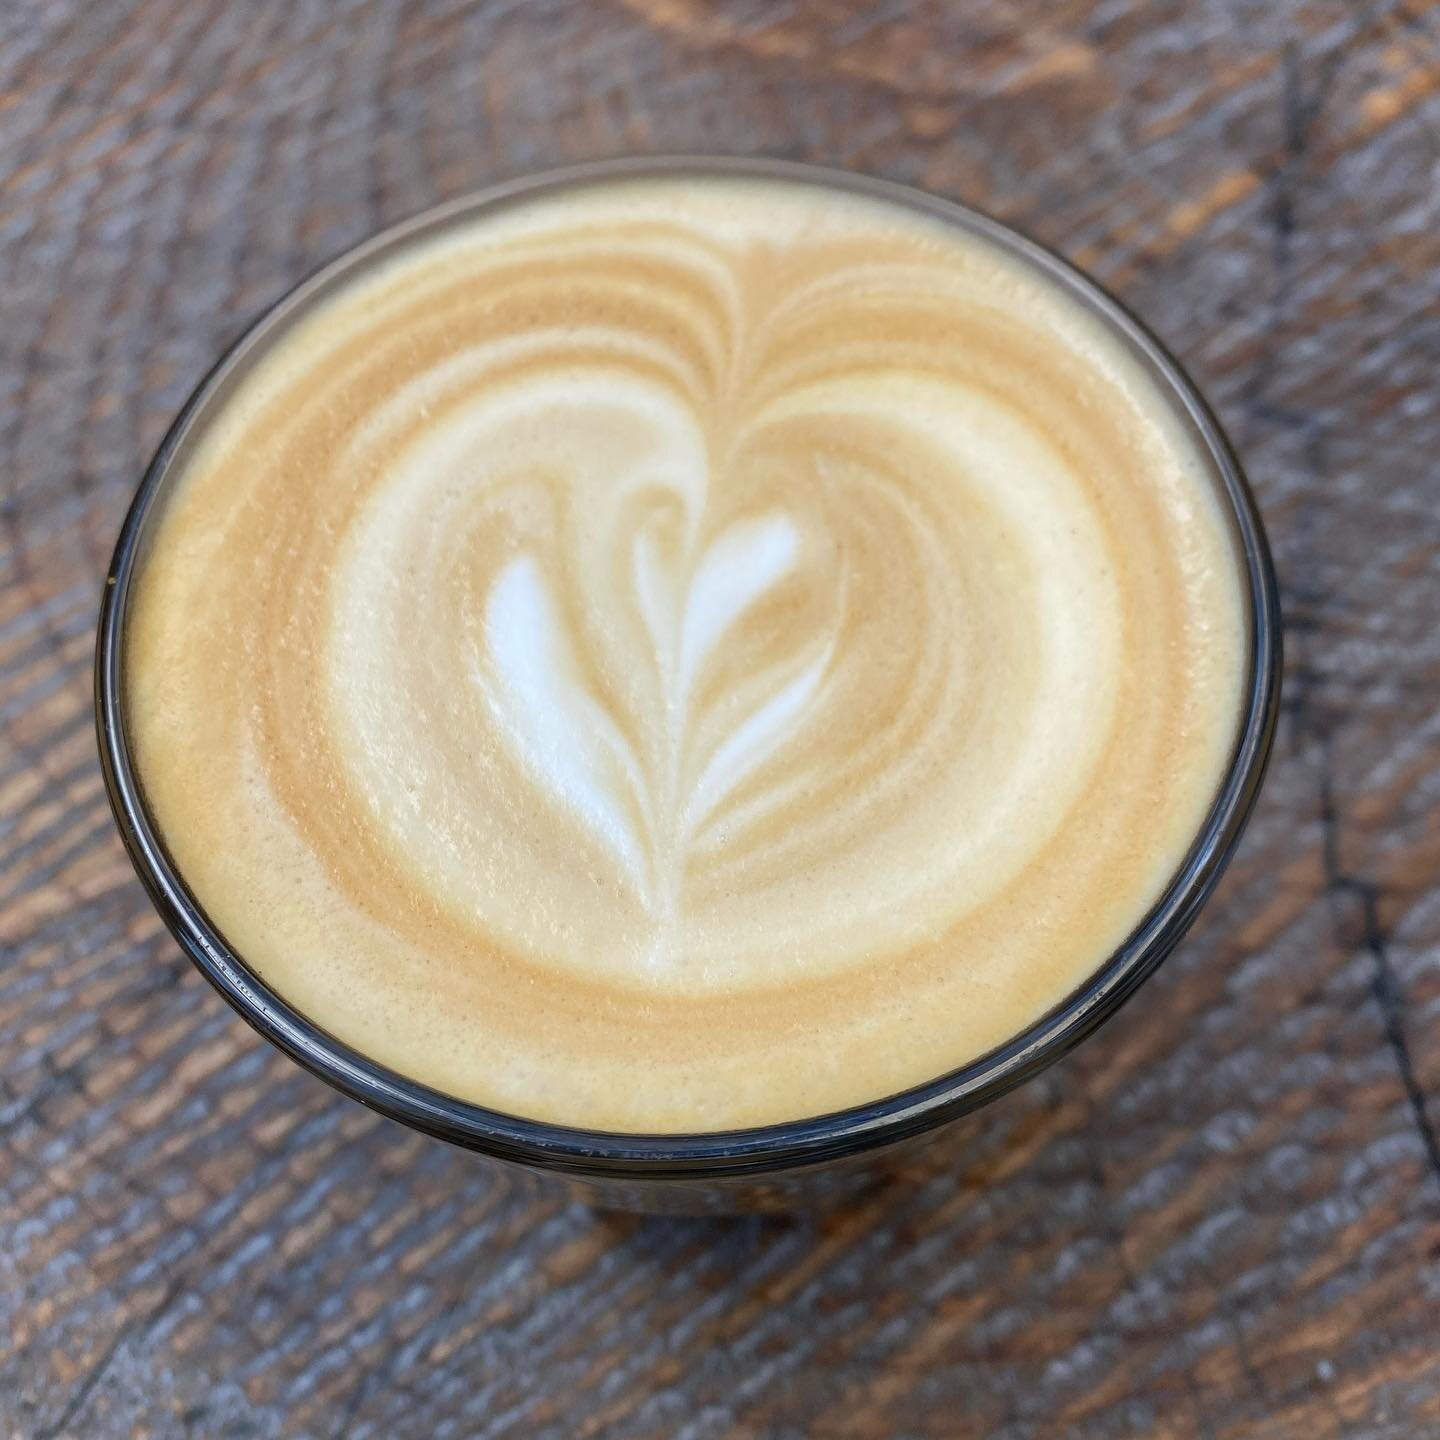 I sat outside today first time in almost a year and had a latte at Stable Cafe by SFRC for a social distance visit with Priscilla Hill, one of SFRC Reiki Practitioners. Feeling grateful ❤️🙏❤️